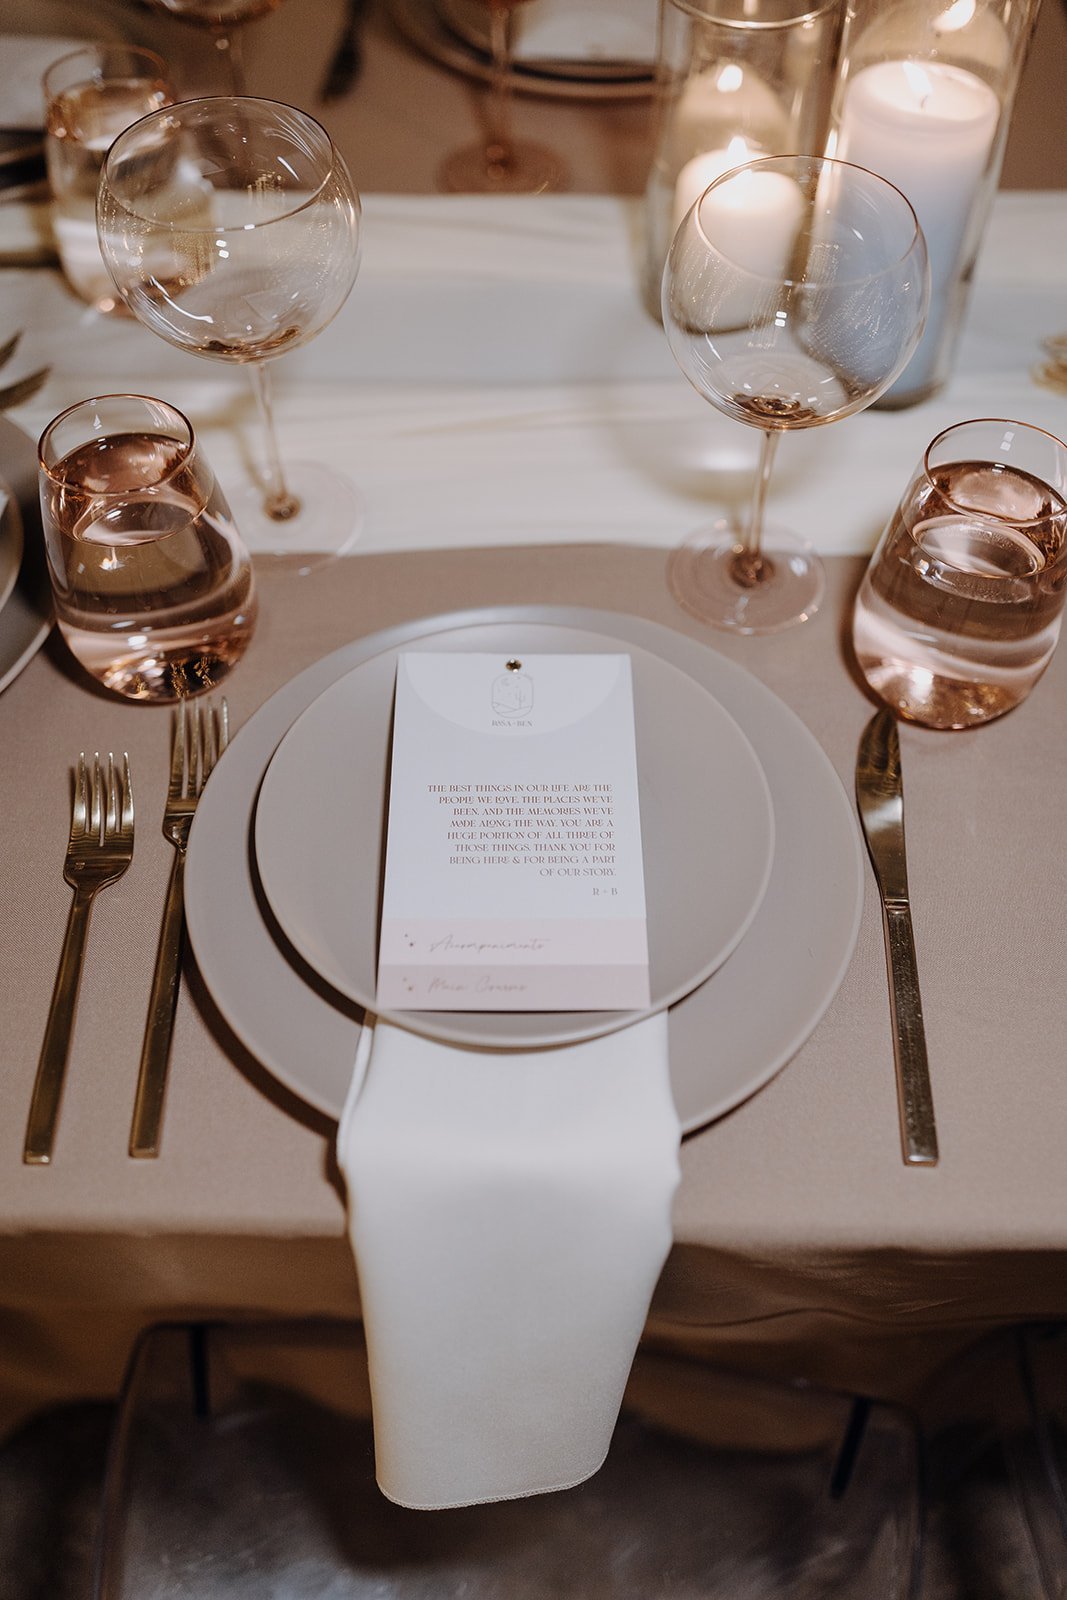 Neutral place setting at Persian wedding